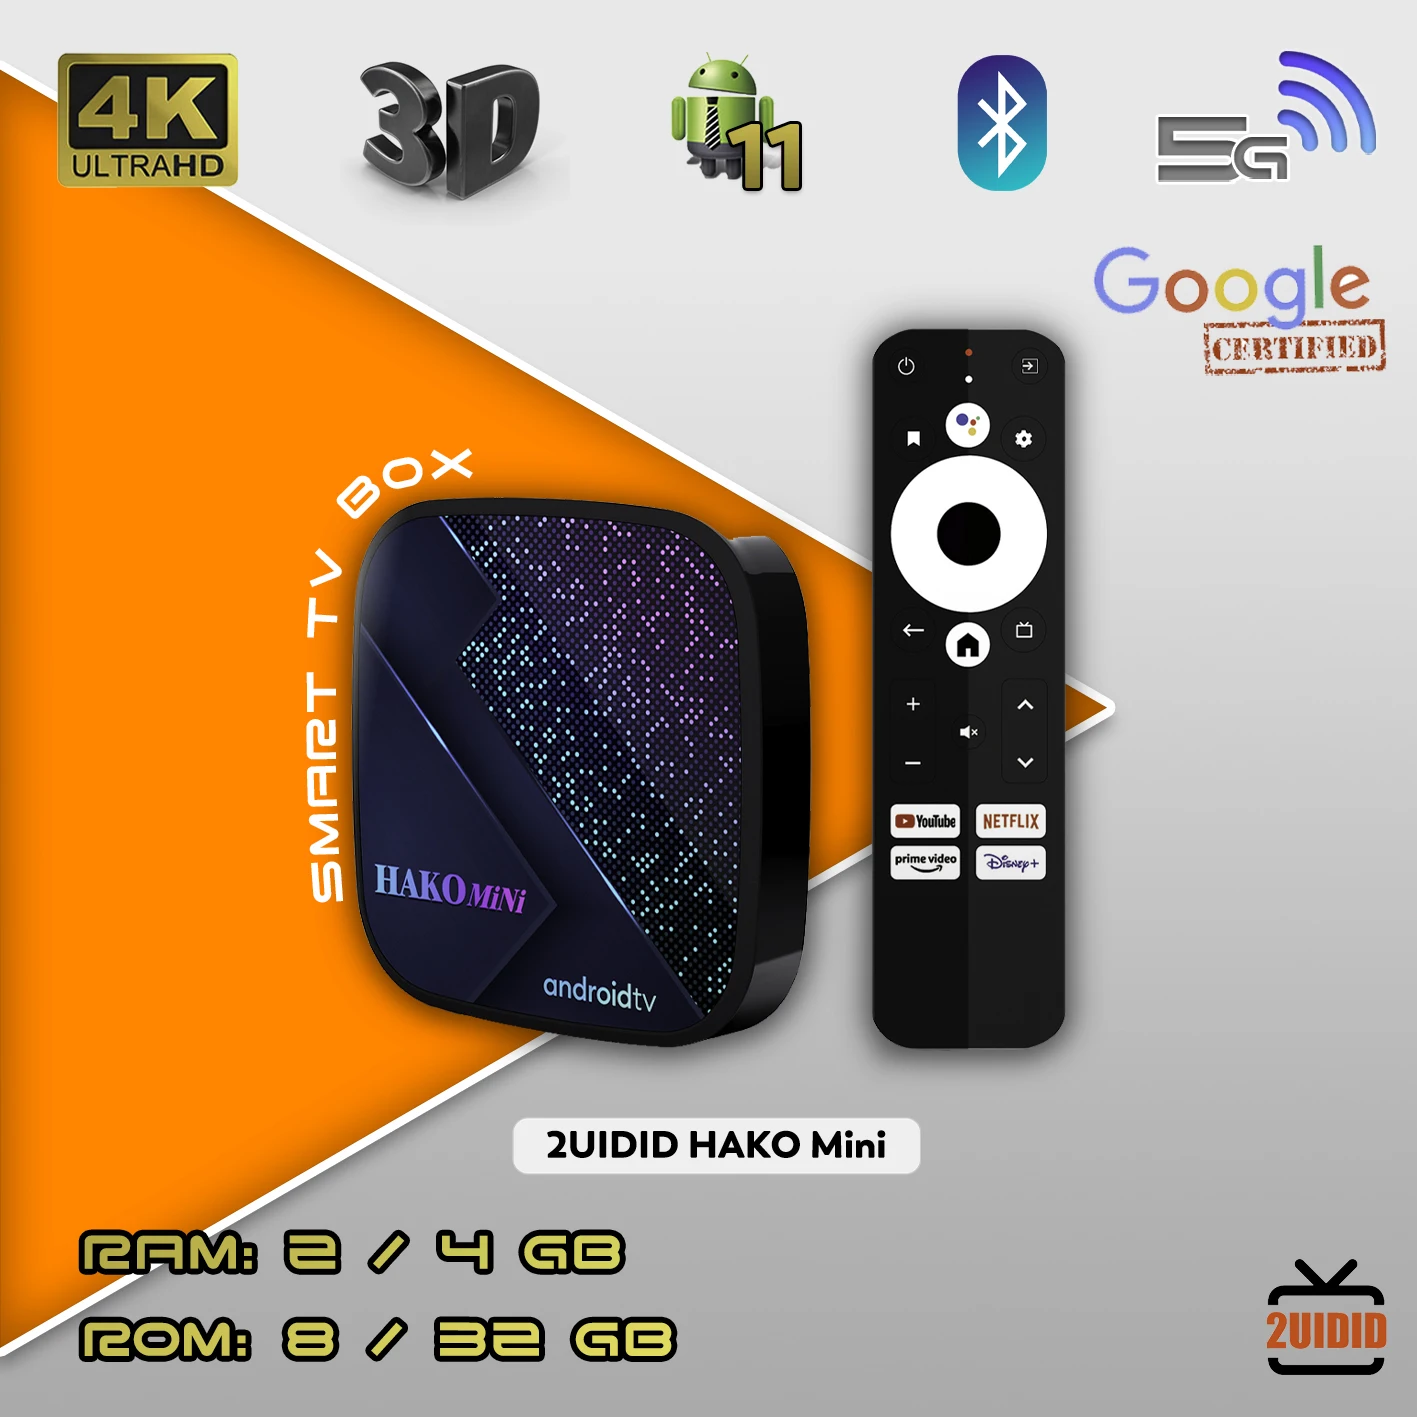 2UIDID HAKOmini Amlogic S905Y Google Certified Android 11 TV Box 2G/4GB 8G/32GB DDR4 Androidtv 11 4K Netflix Youtube Set Top